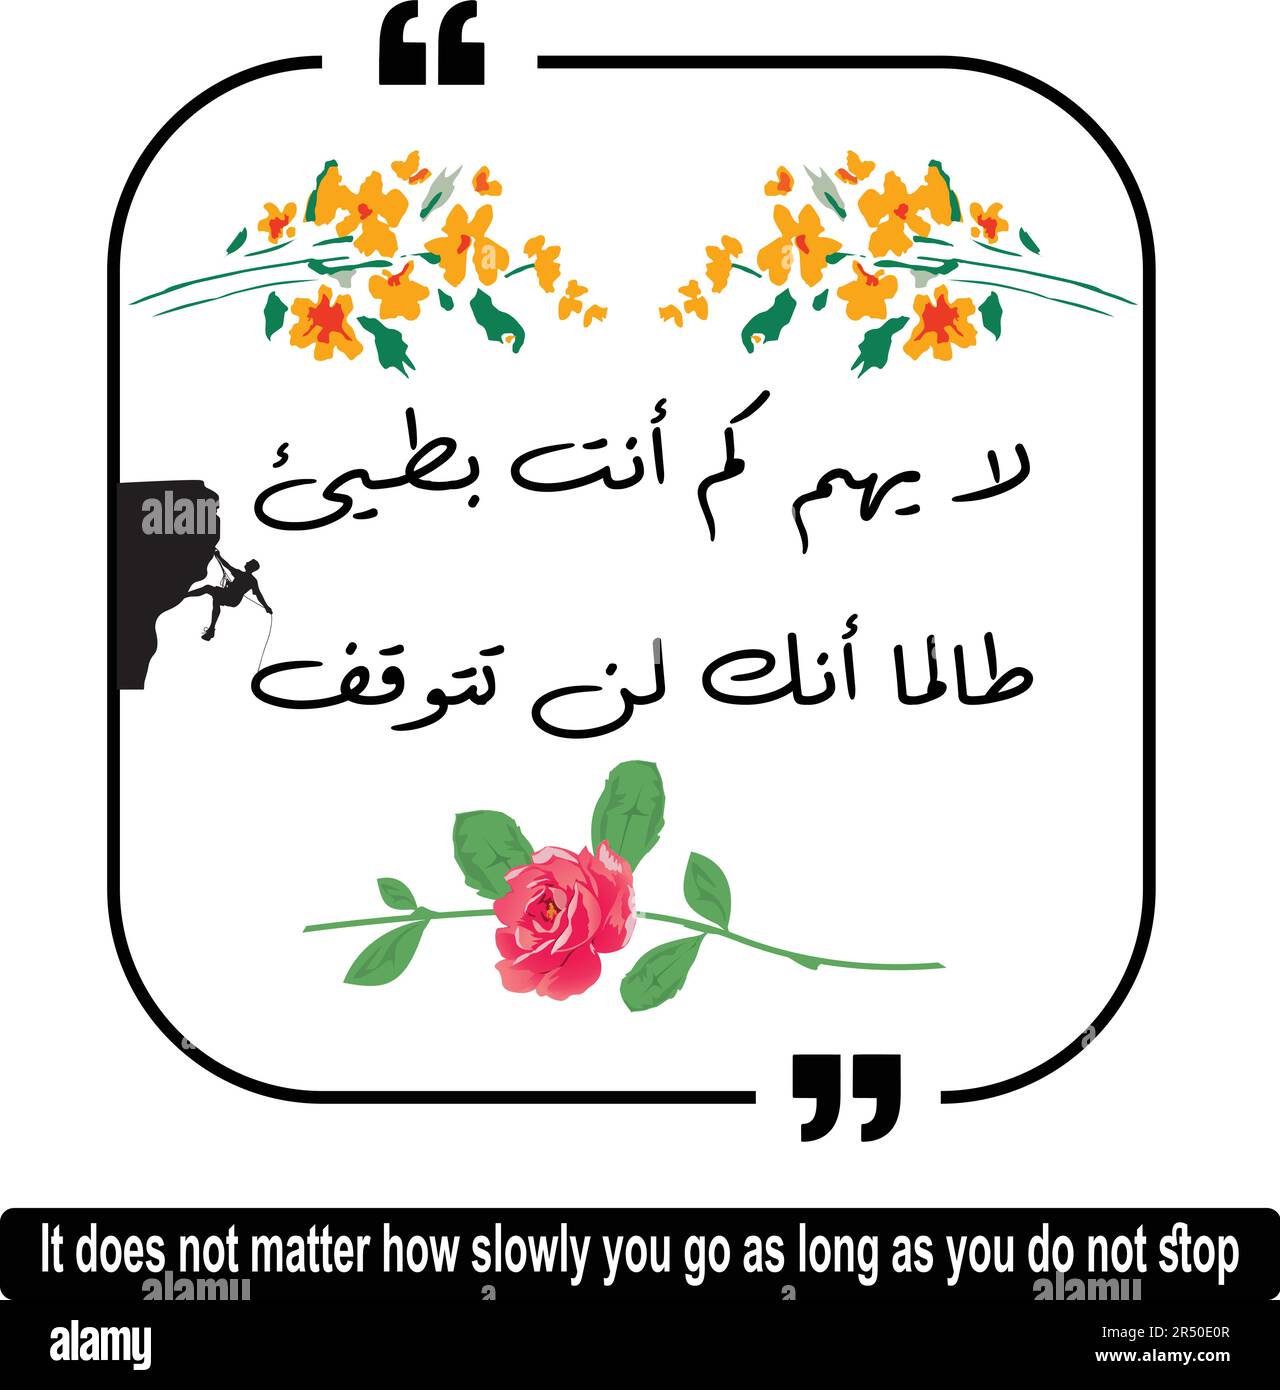 Arabic quote means It does not matter how slowly you go as long as you do not stop. Arabic quotes with English translation. Stock Vector